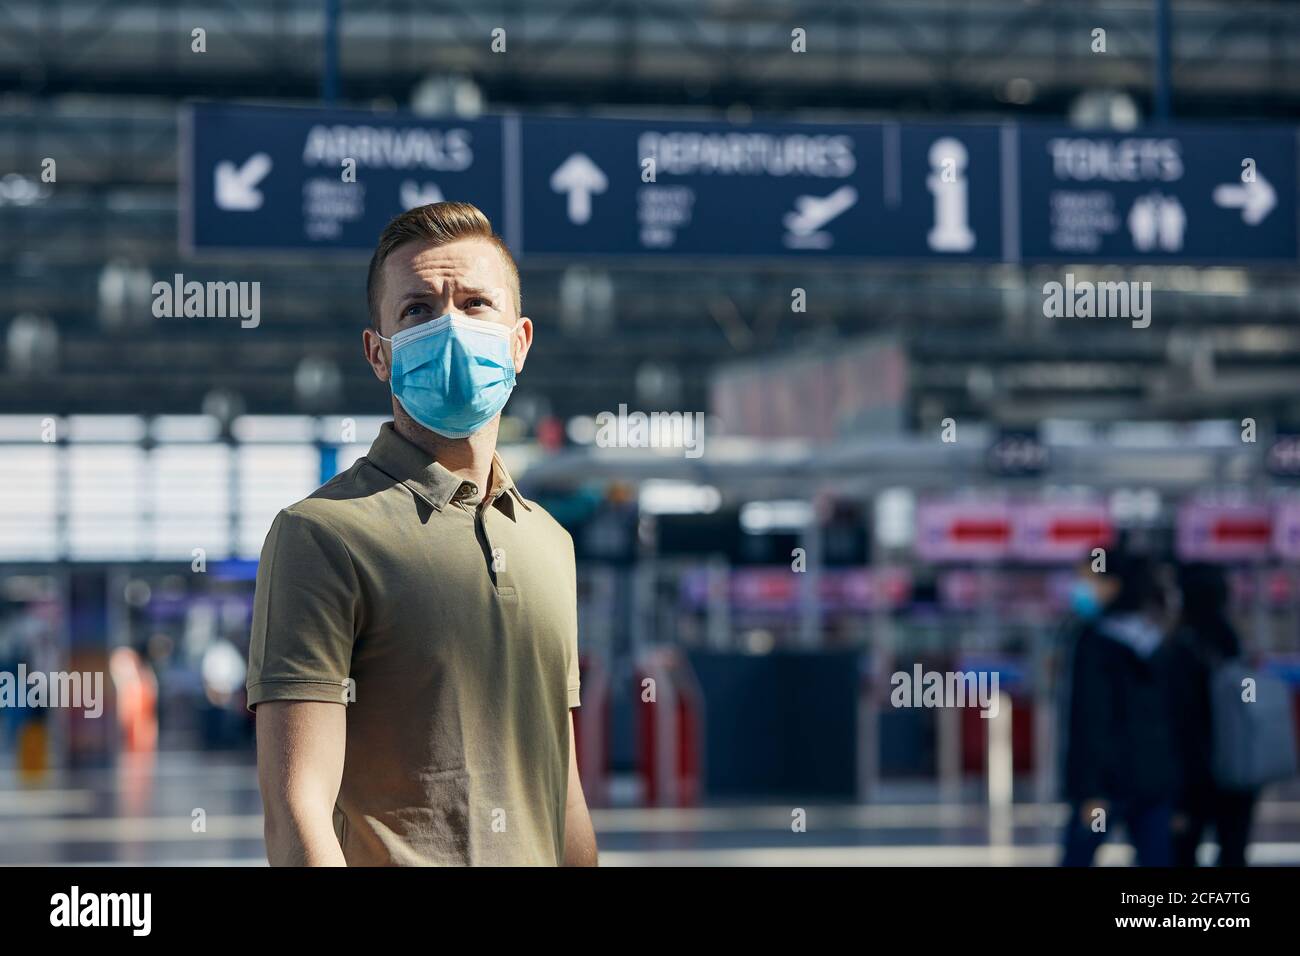 Man wearing face mask against airport check-in counter. Themes travel in new normal, coronavirus and personal protection. Stock Photo